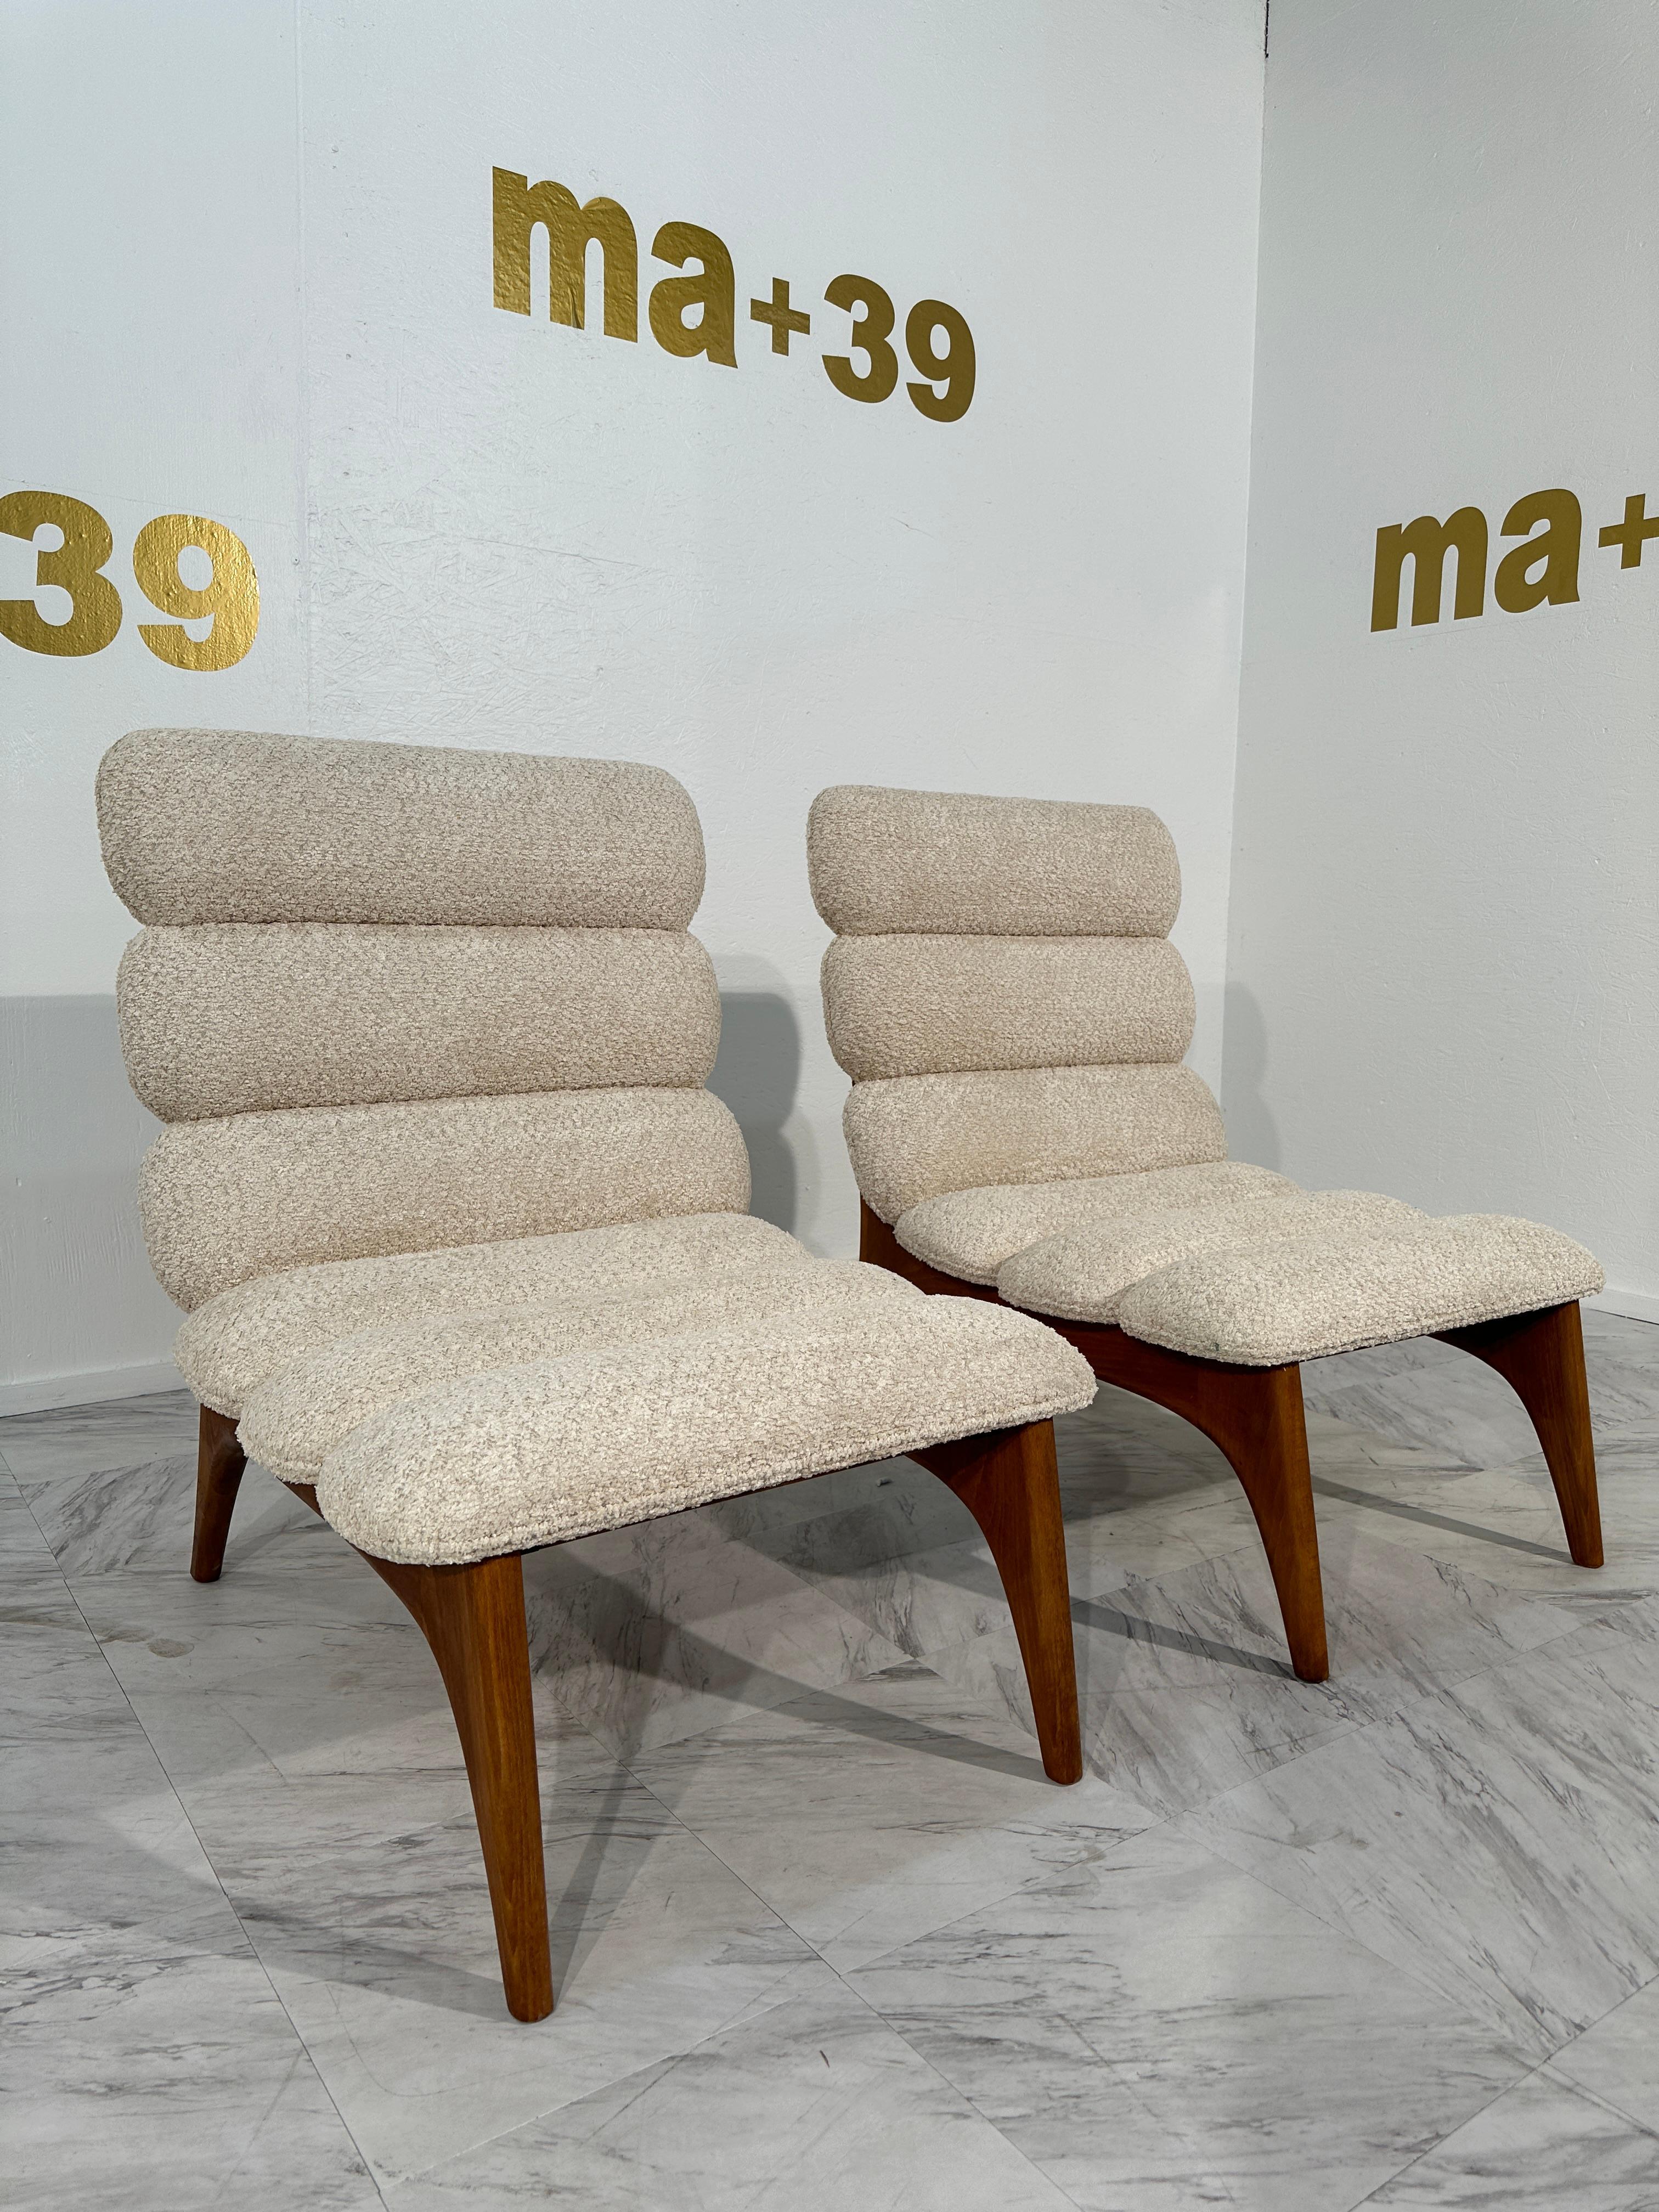 Pair of Mid-Century Modern Danish Lounge Chairs in Boucle Fabric 1980s For Sale 2